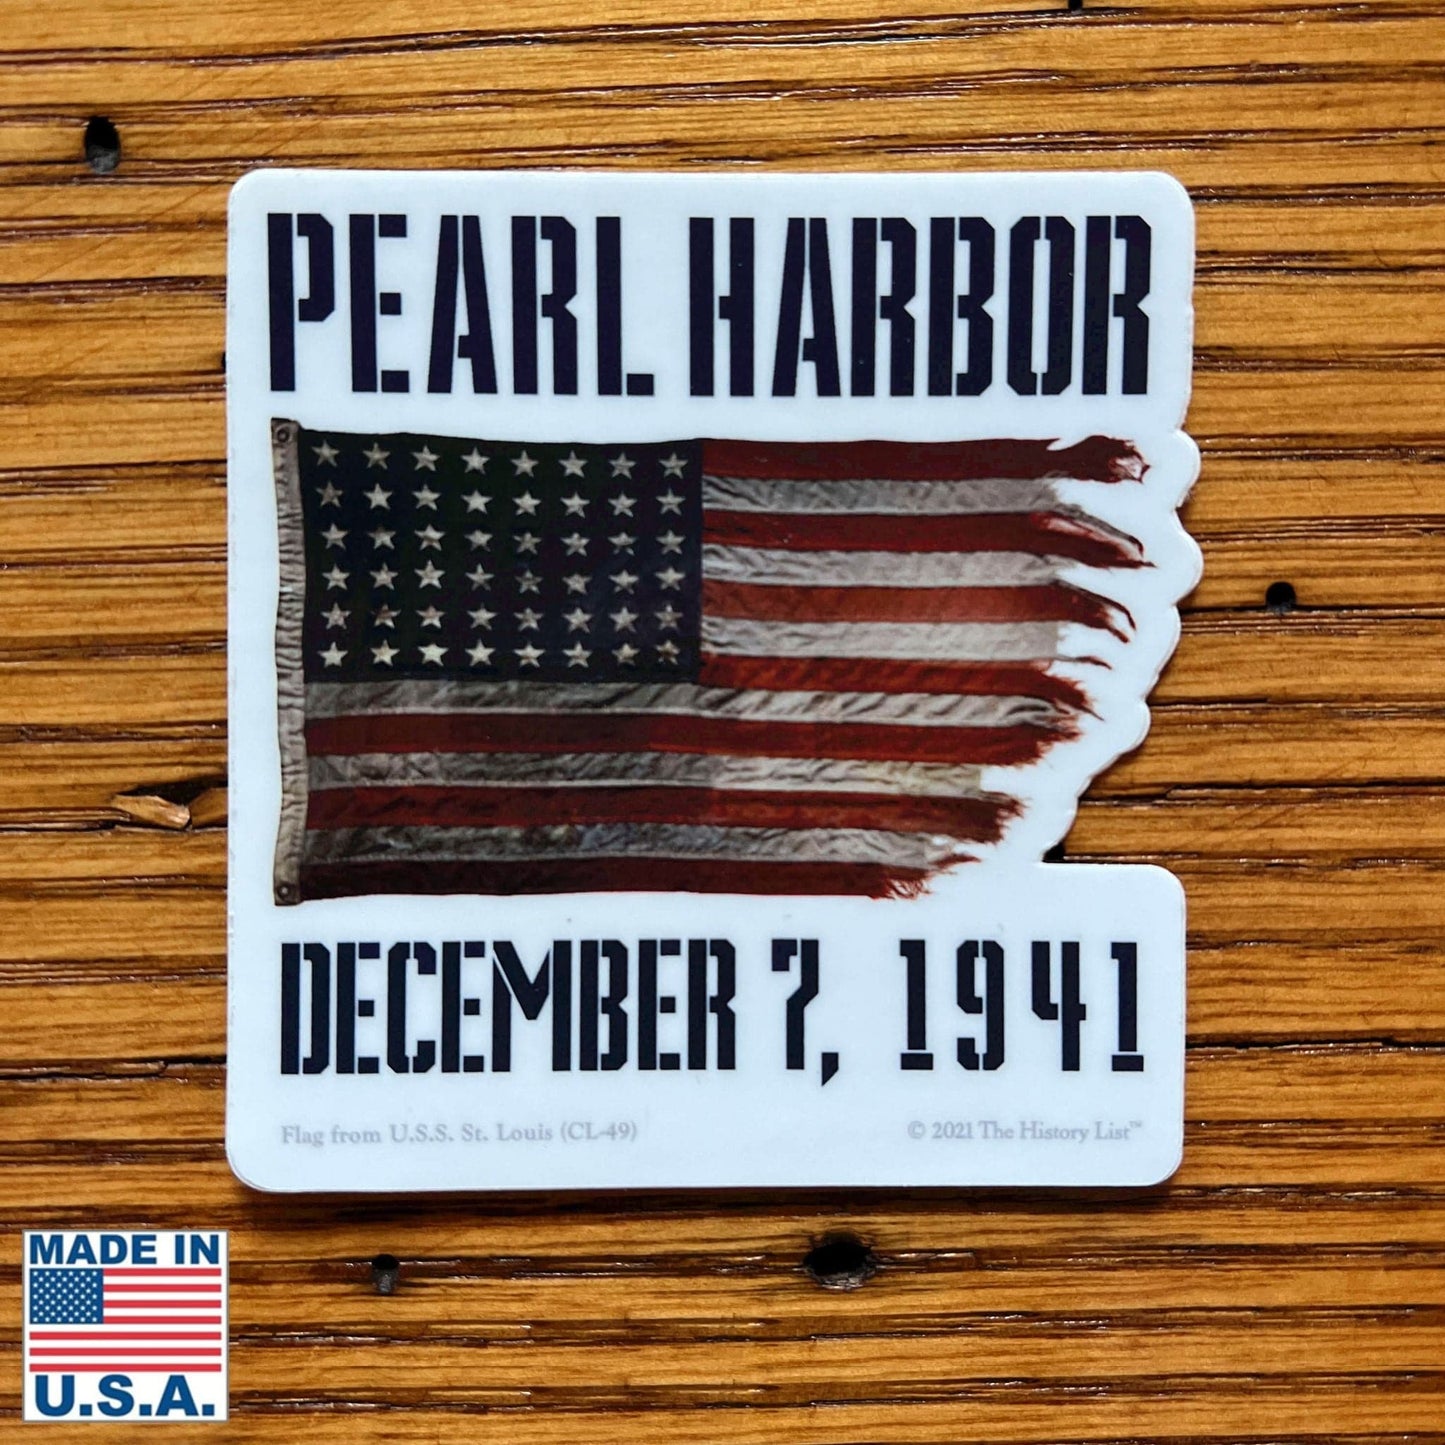 Pearl Harbor “Battleship Row” Sticker from the History List Store